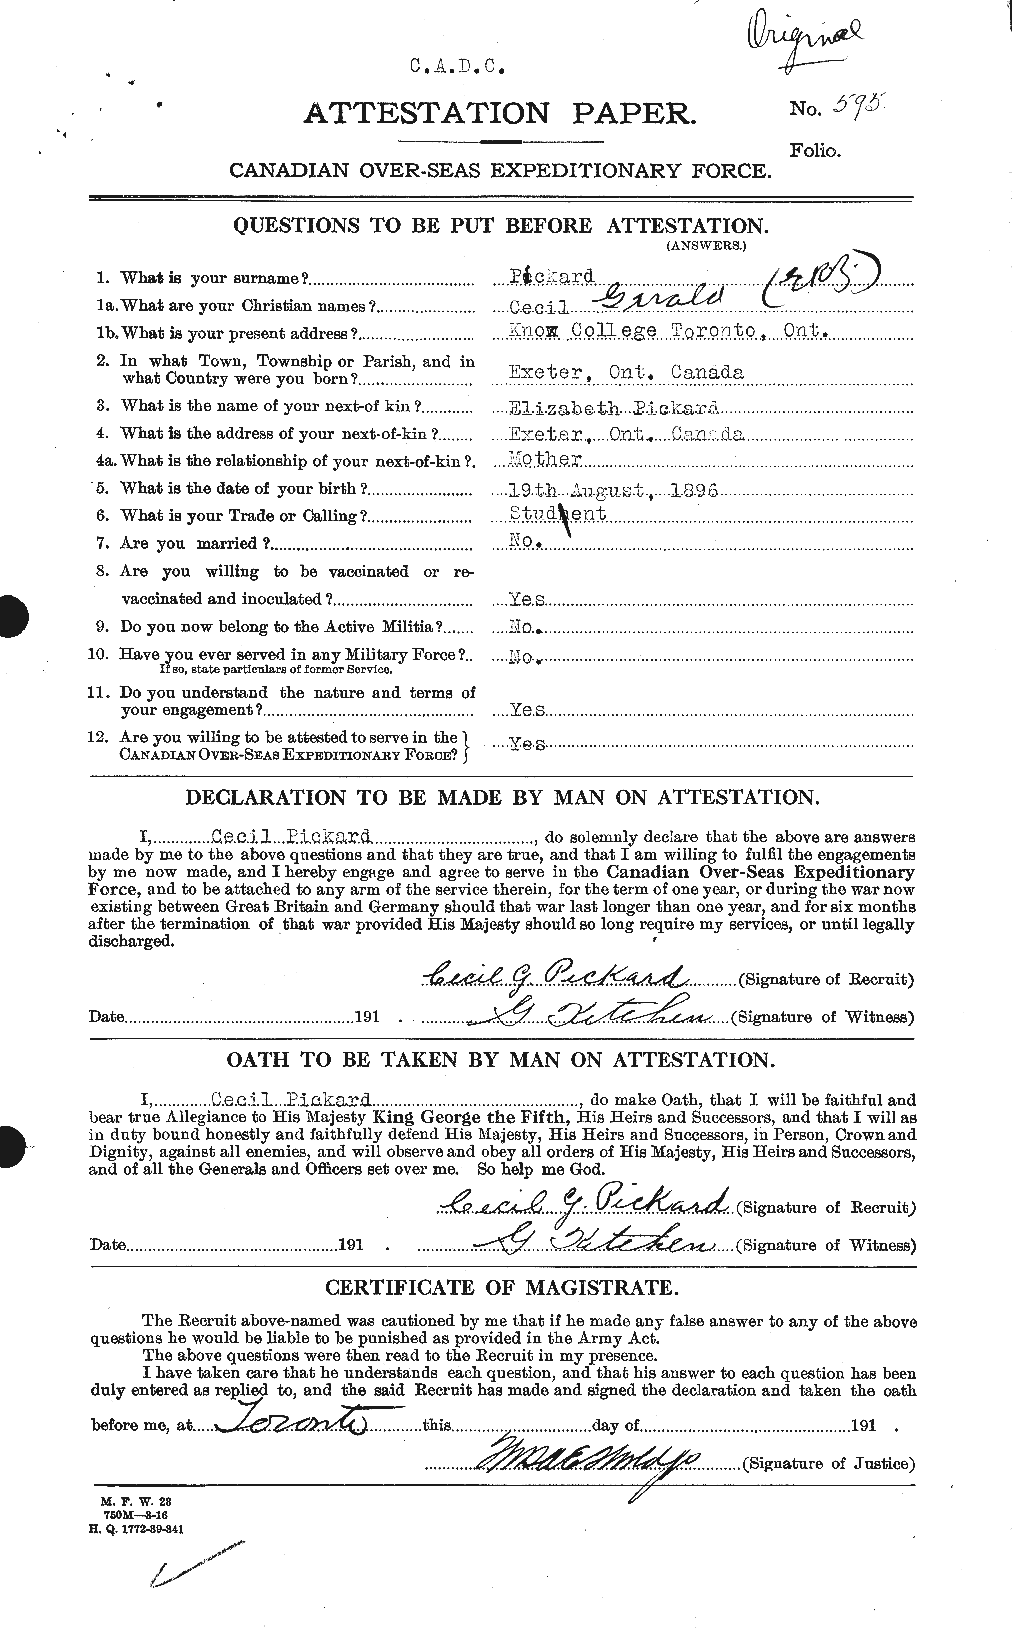 Personnel Records of the First World War - CEF 579151a